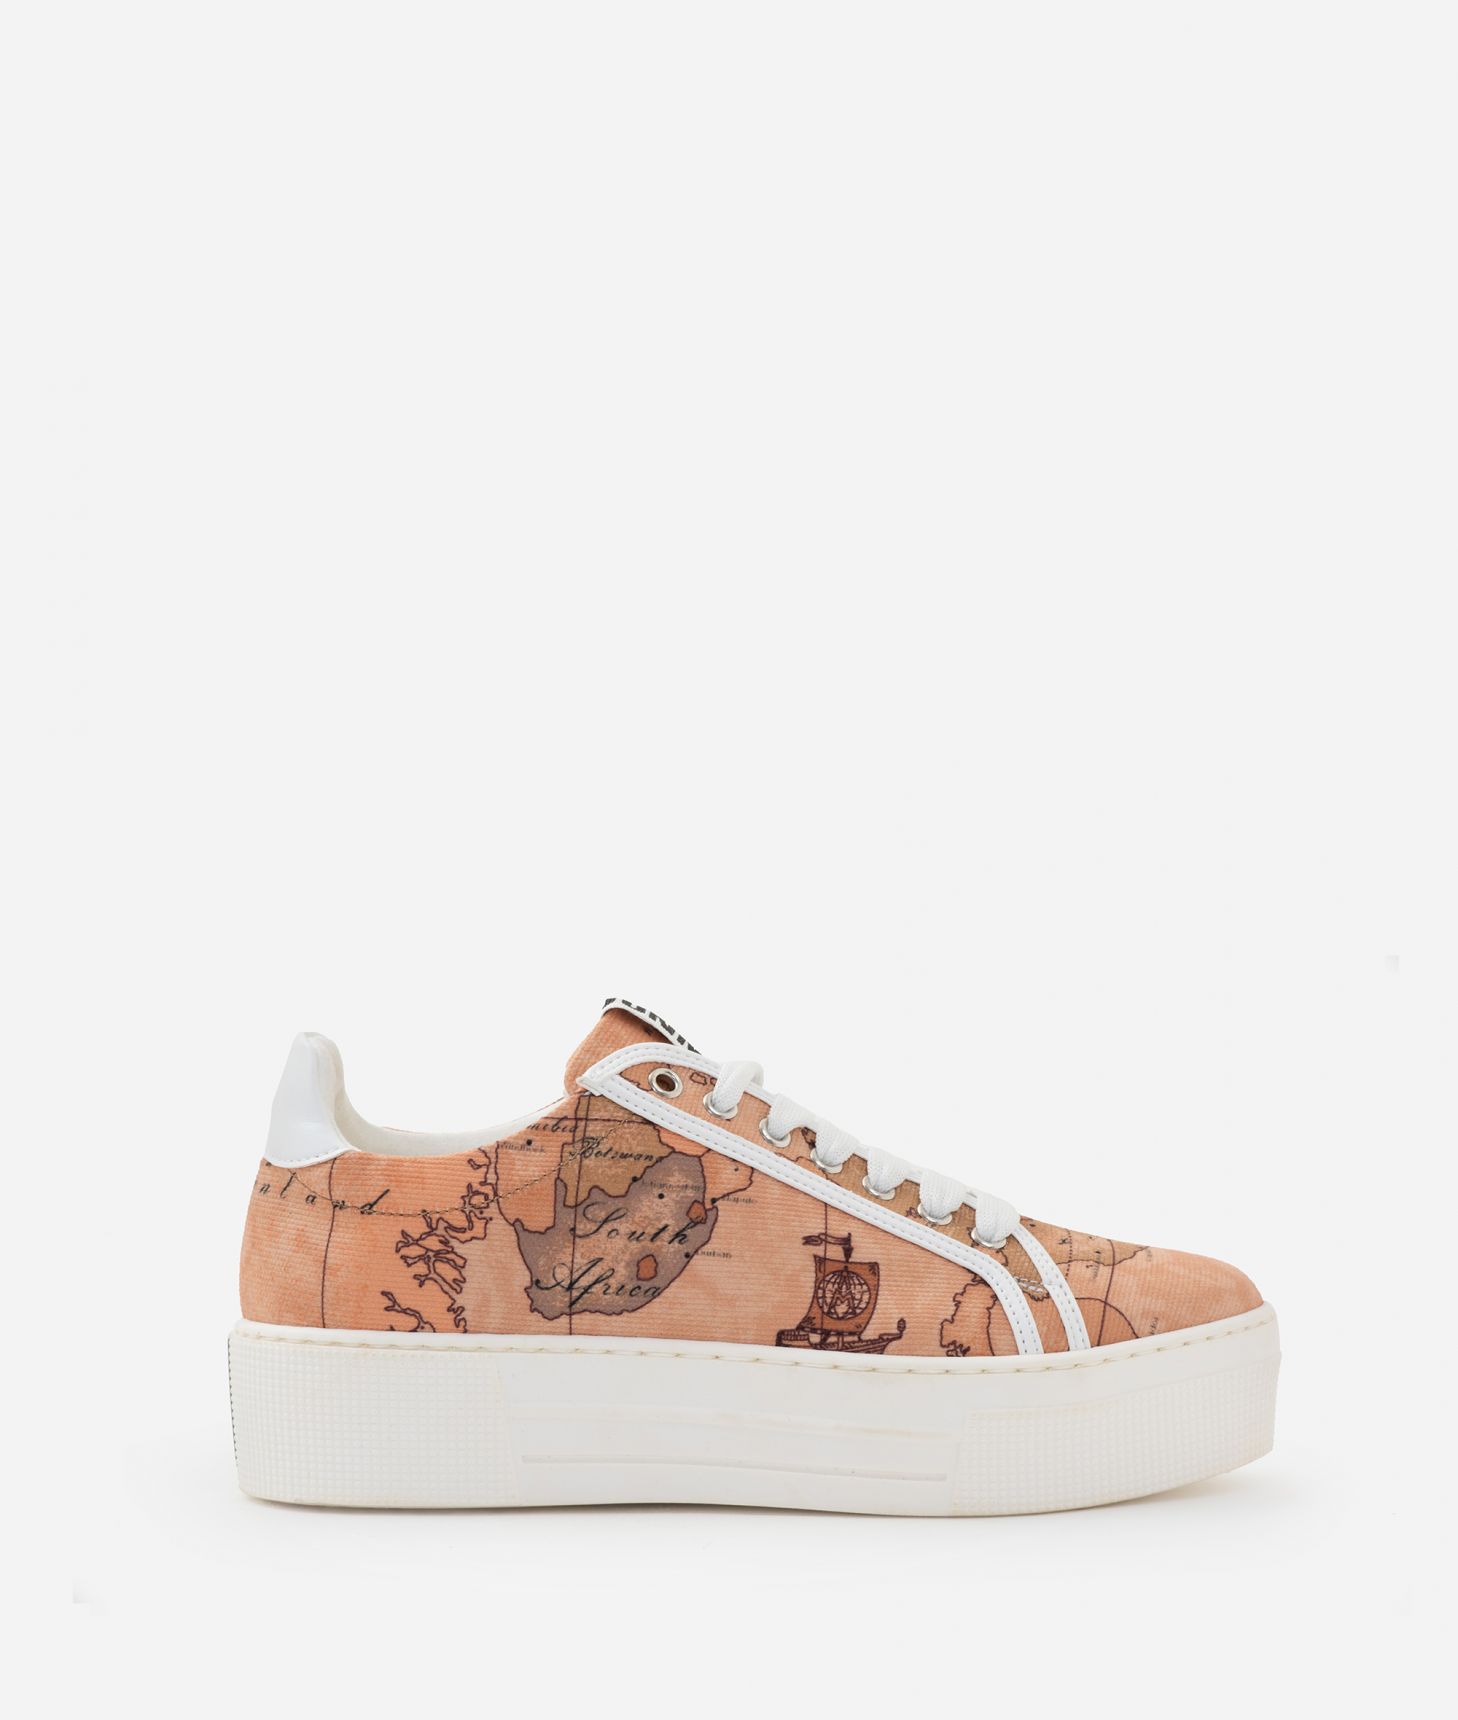 Donnavventura canvas sneakers with Geo Classic print ,front